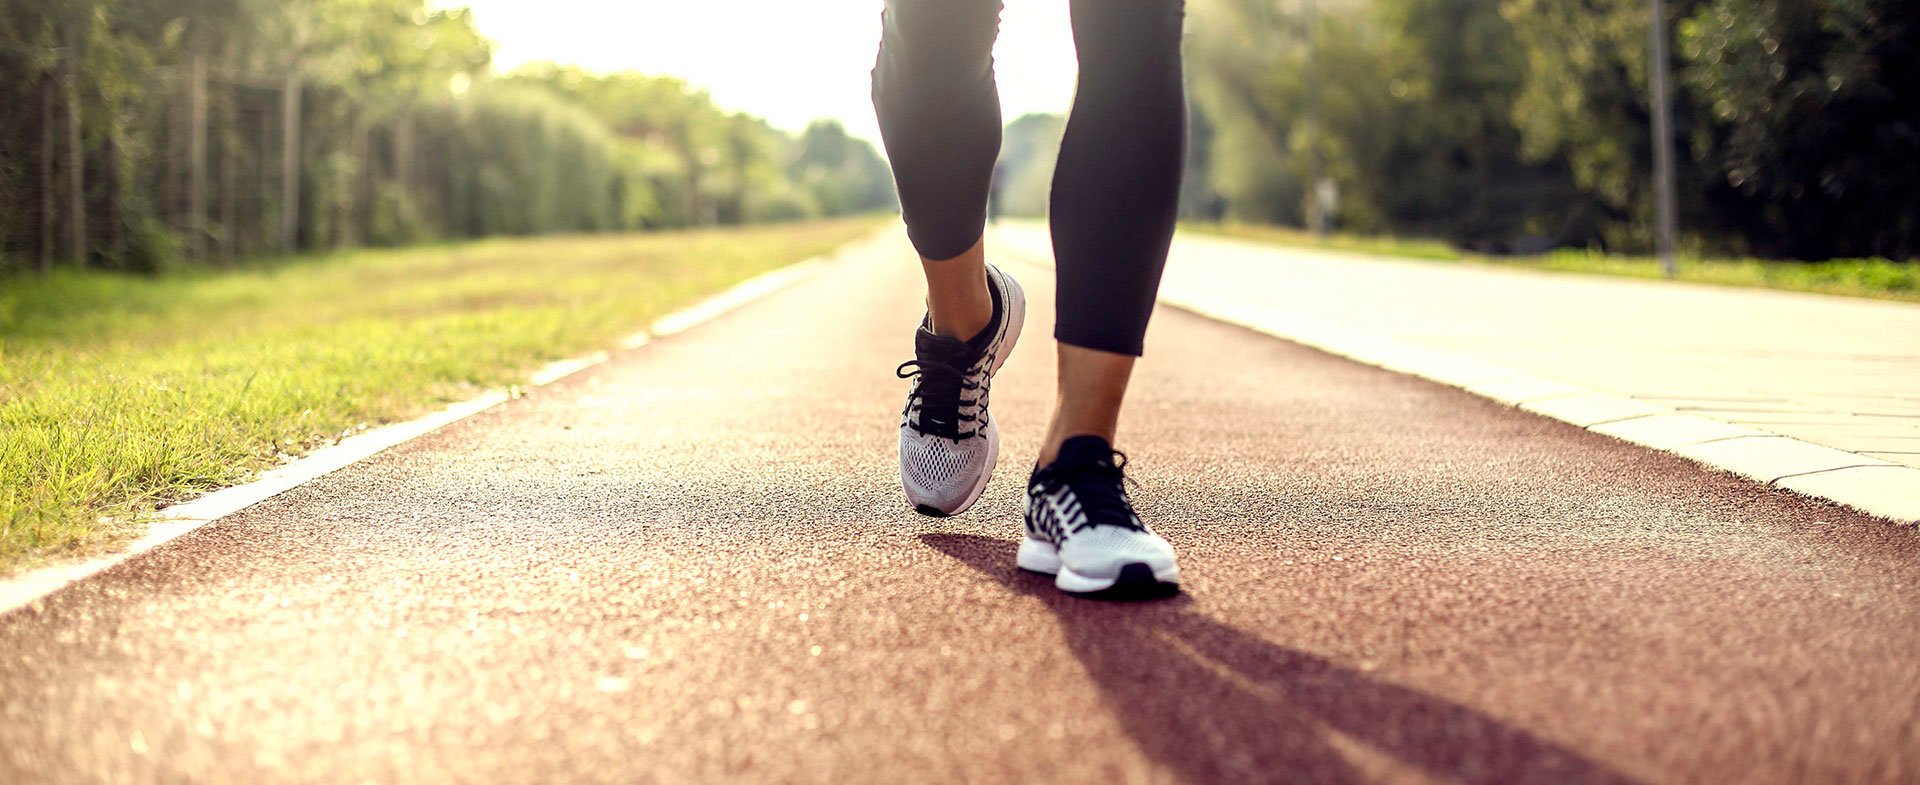 10 Ways To Walk Your Way To Better Health